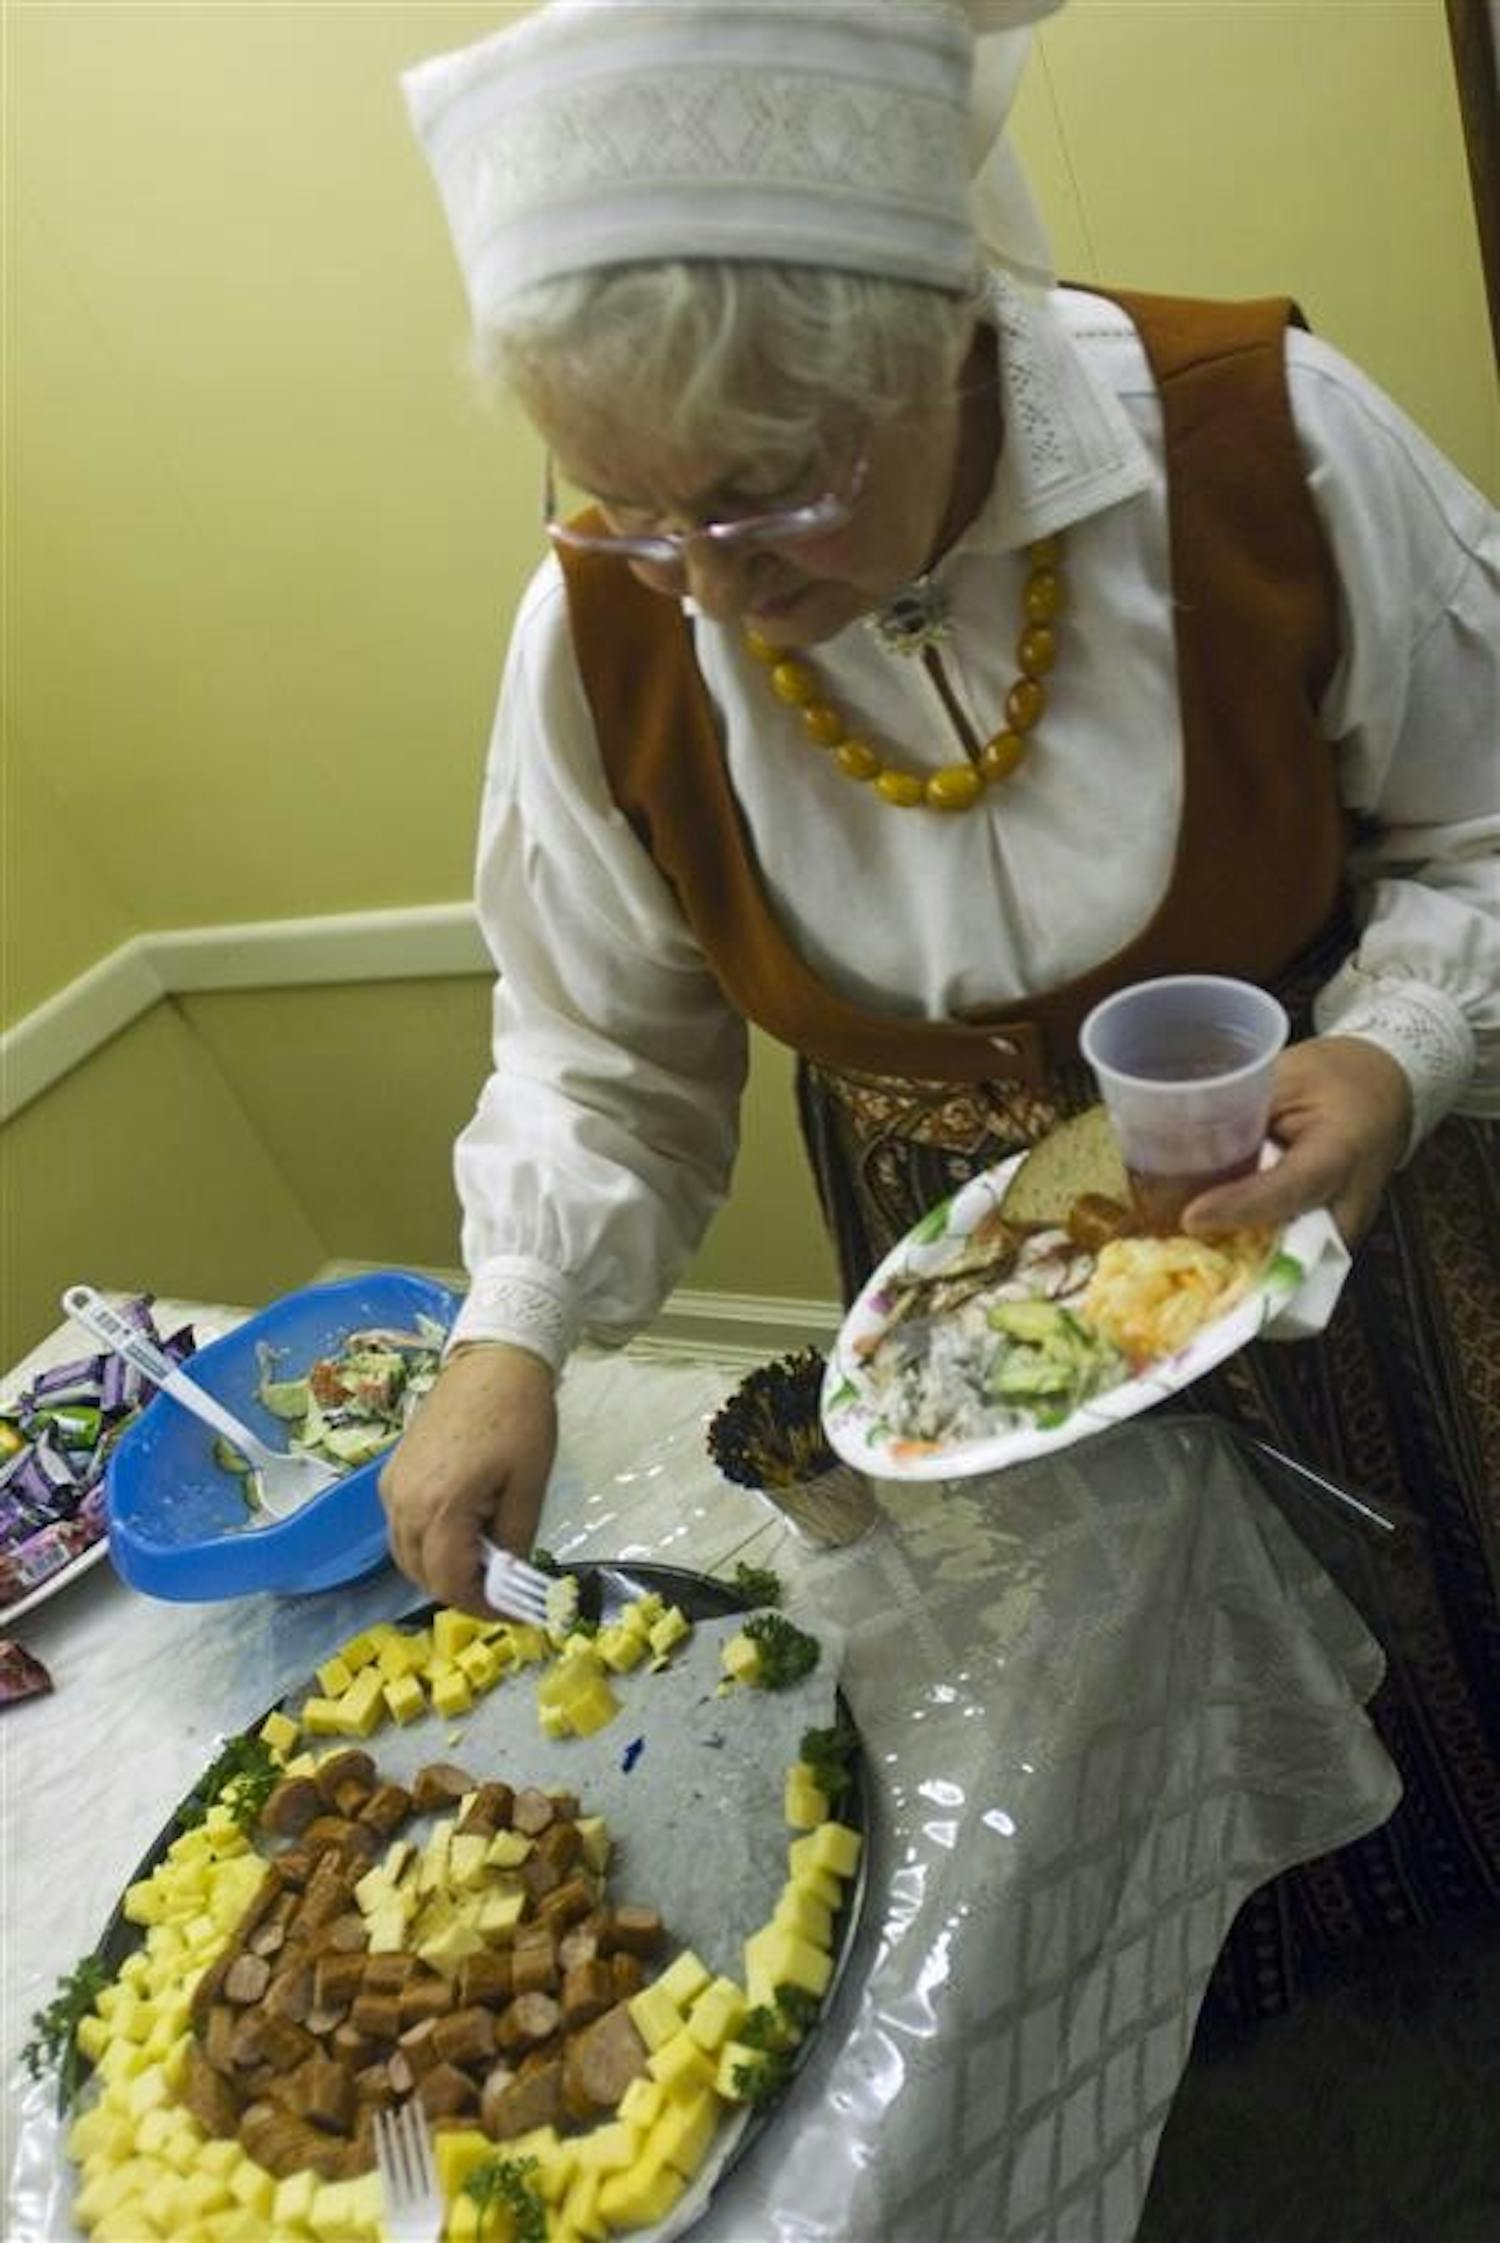 IU alumnus Skaidrite Hatfield who moved from Latvia in 1950 and graduated from IU in 1959 dishes out a meal during a Latvian Indepence Day celebration Thursday night in the IMU Faculty Club. Hatfield is adorned in a historic outift traditionally worn in the region of Zemgale, Latvia.